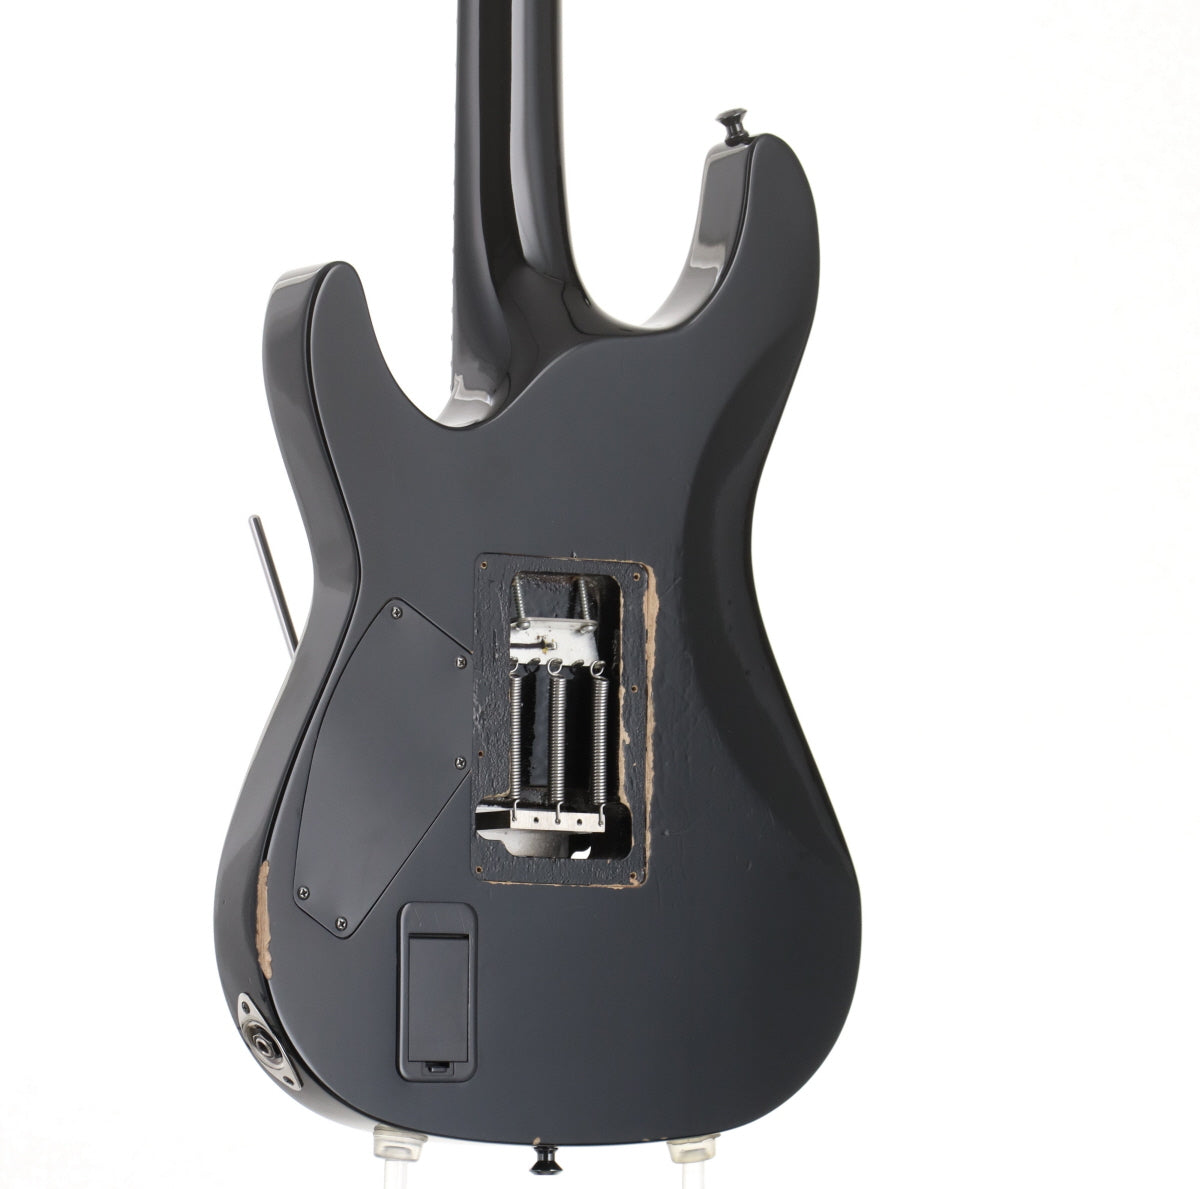 [SN W10054014] USED SCHECTER / AD-C-1-FR MOD [06]